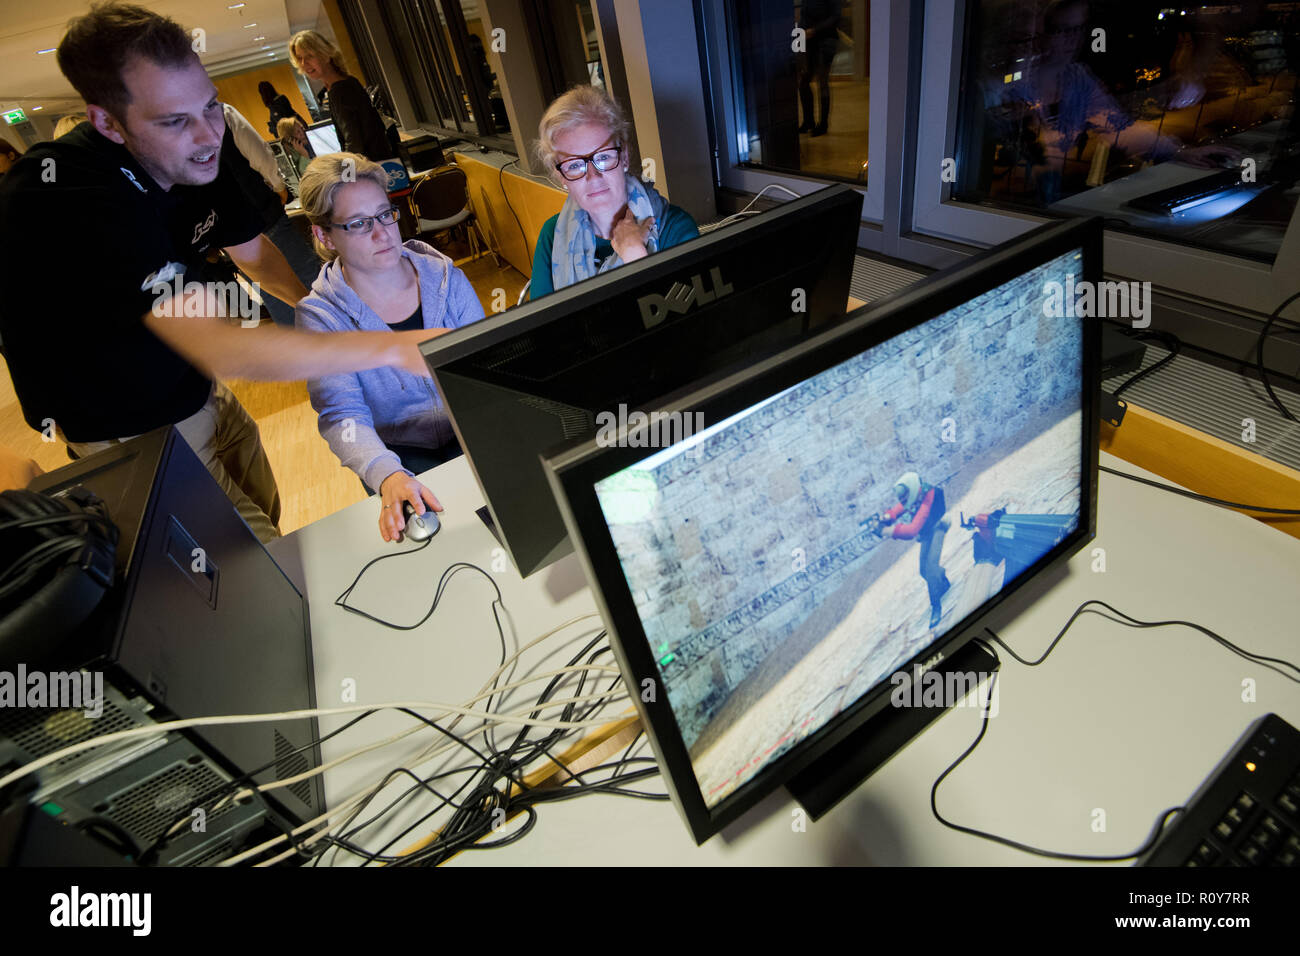 Hannover, Germany. 07th Nov, 2018. Mothers Christine Hippchen (r) and  Kerstin Sohst play the computer game Counter-Strike with computer scientist  Oliver Jathe at a LAN party for parents. The intensive immersion of